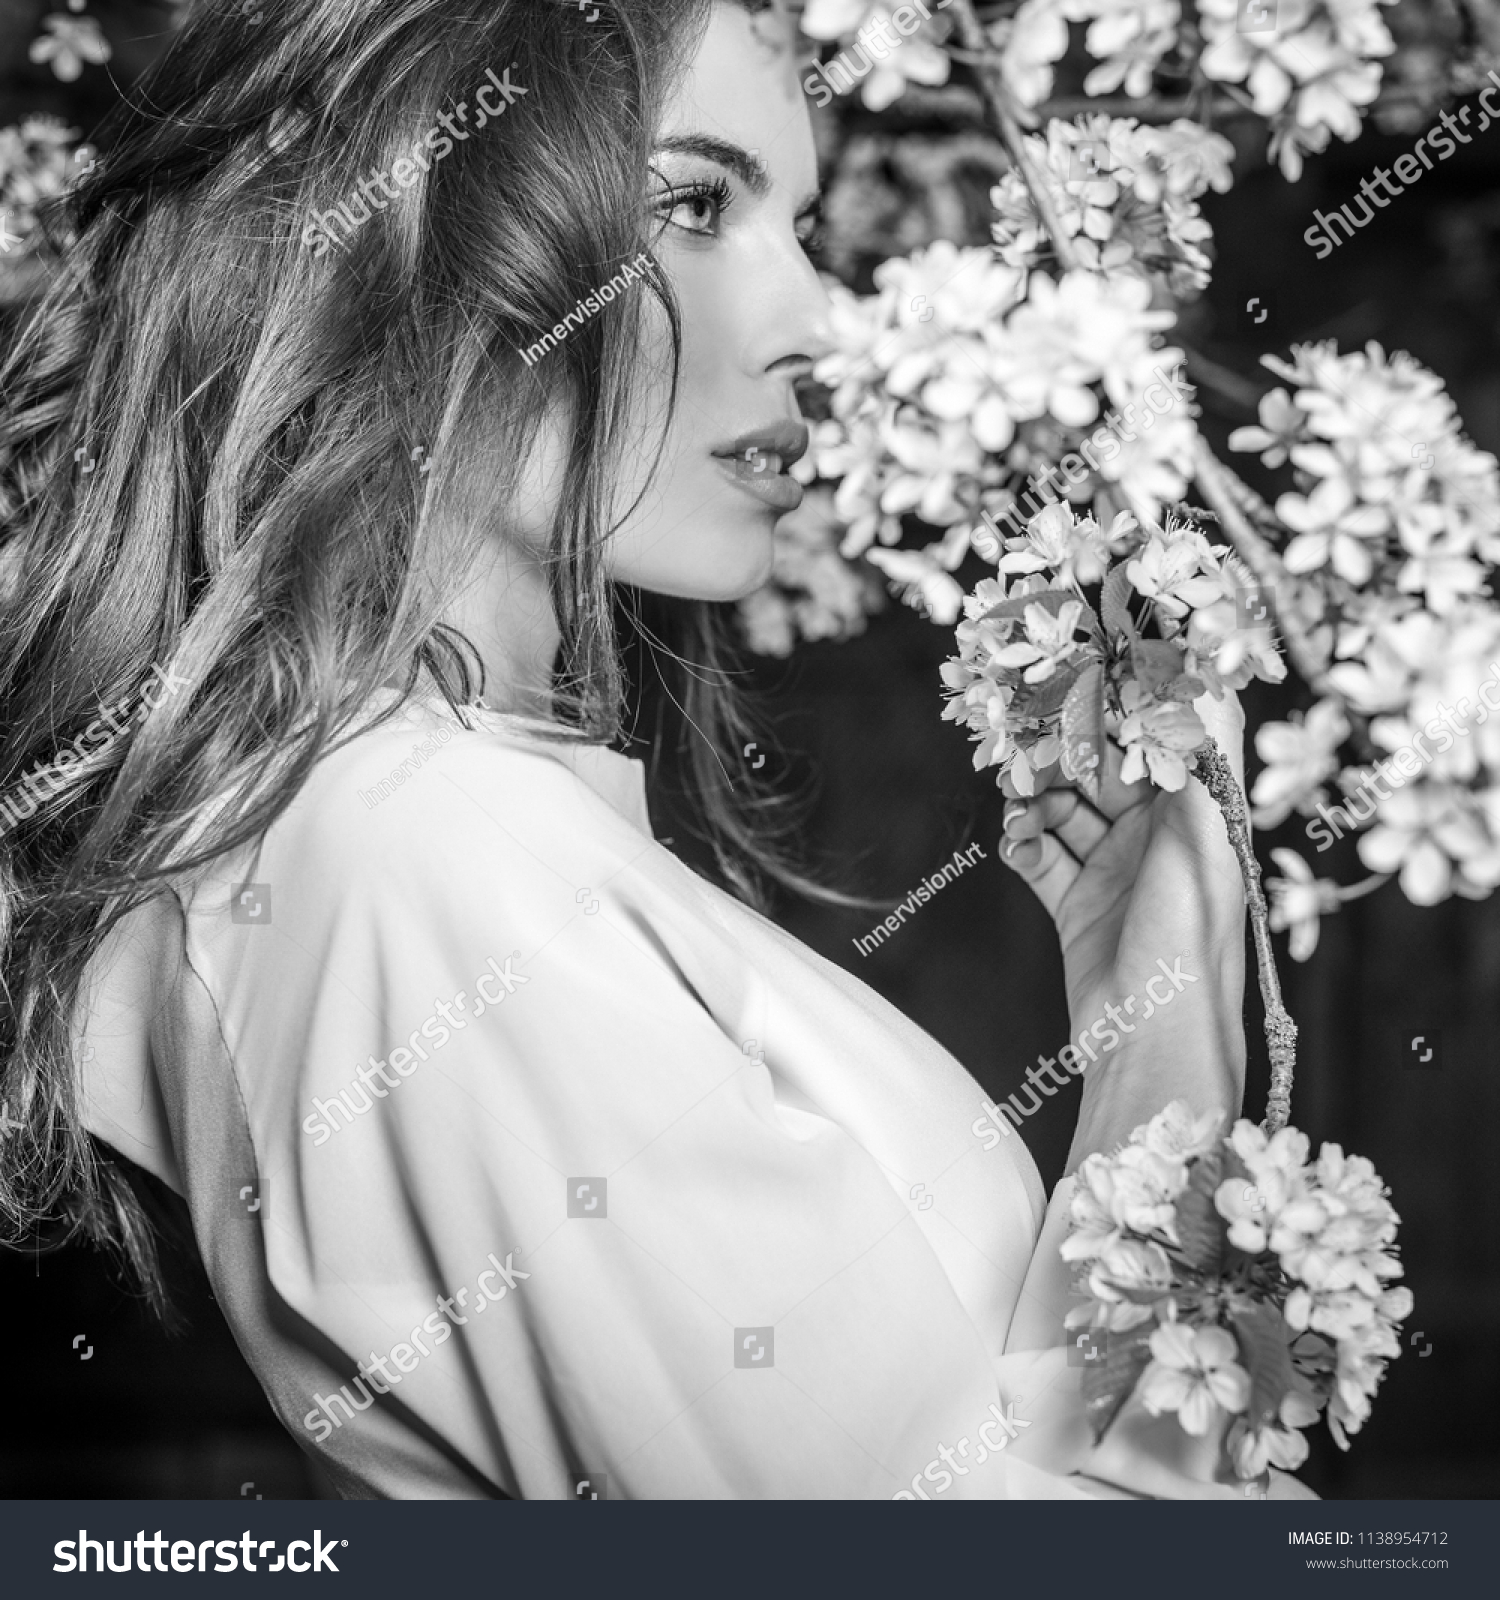 Portrait of beautiful young woman in autumn garden against blooming cherry. Black-white photo. #1138954712